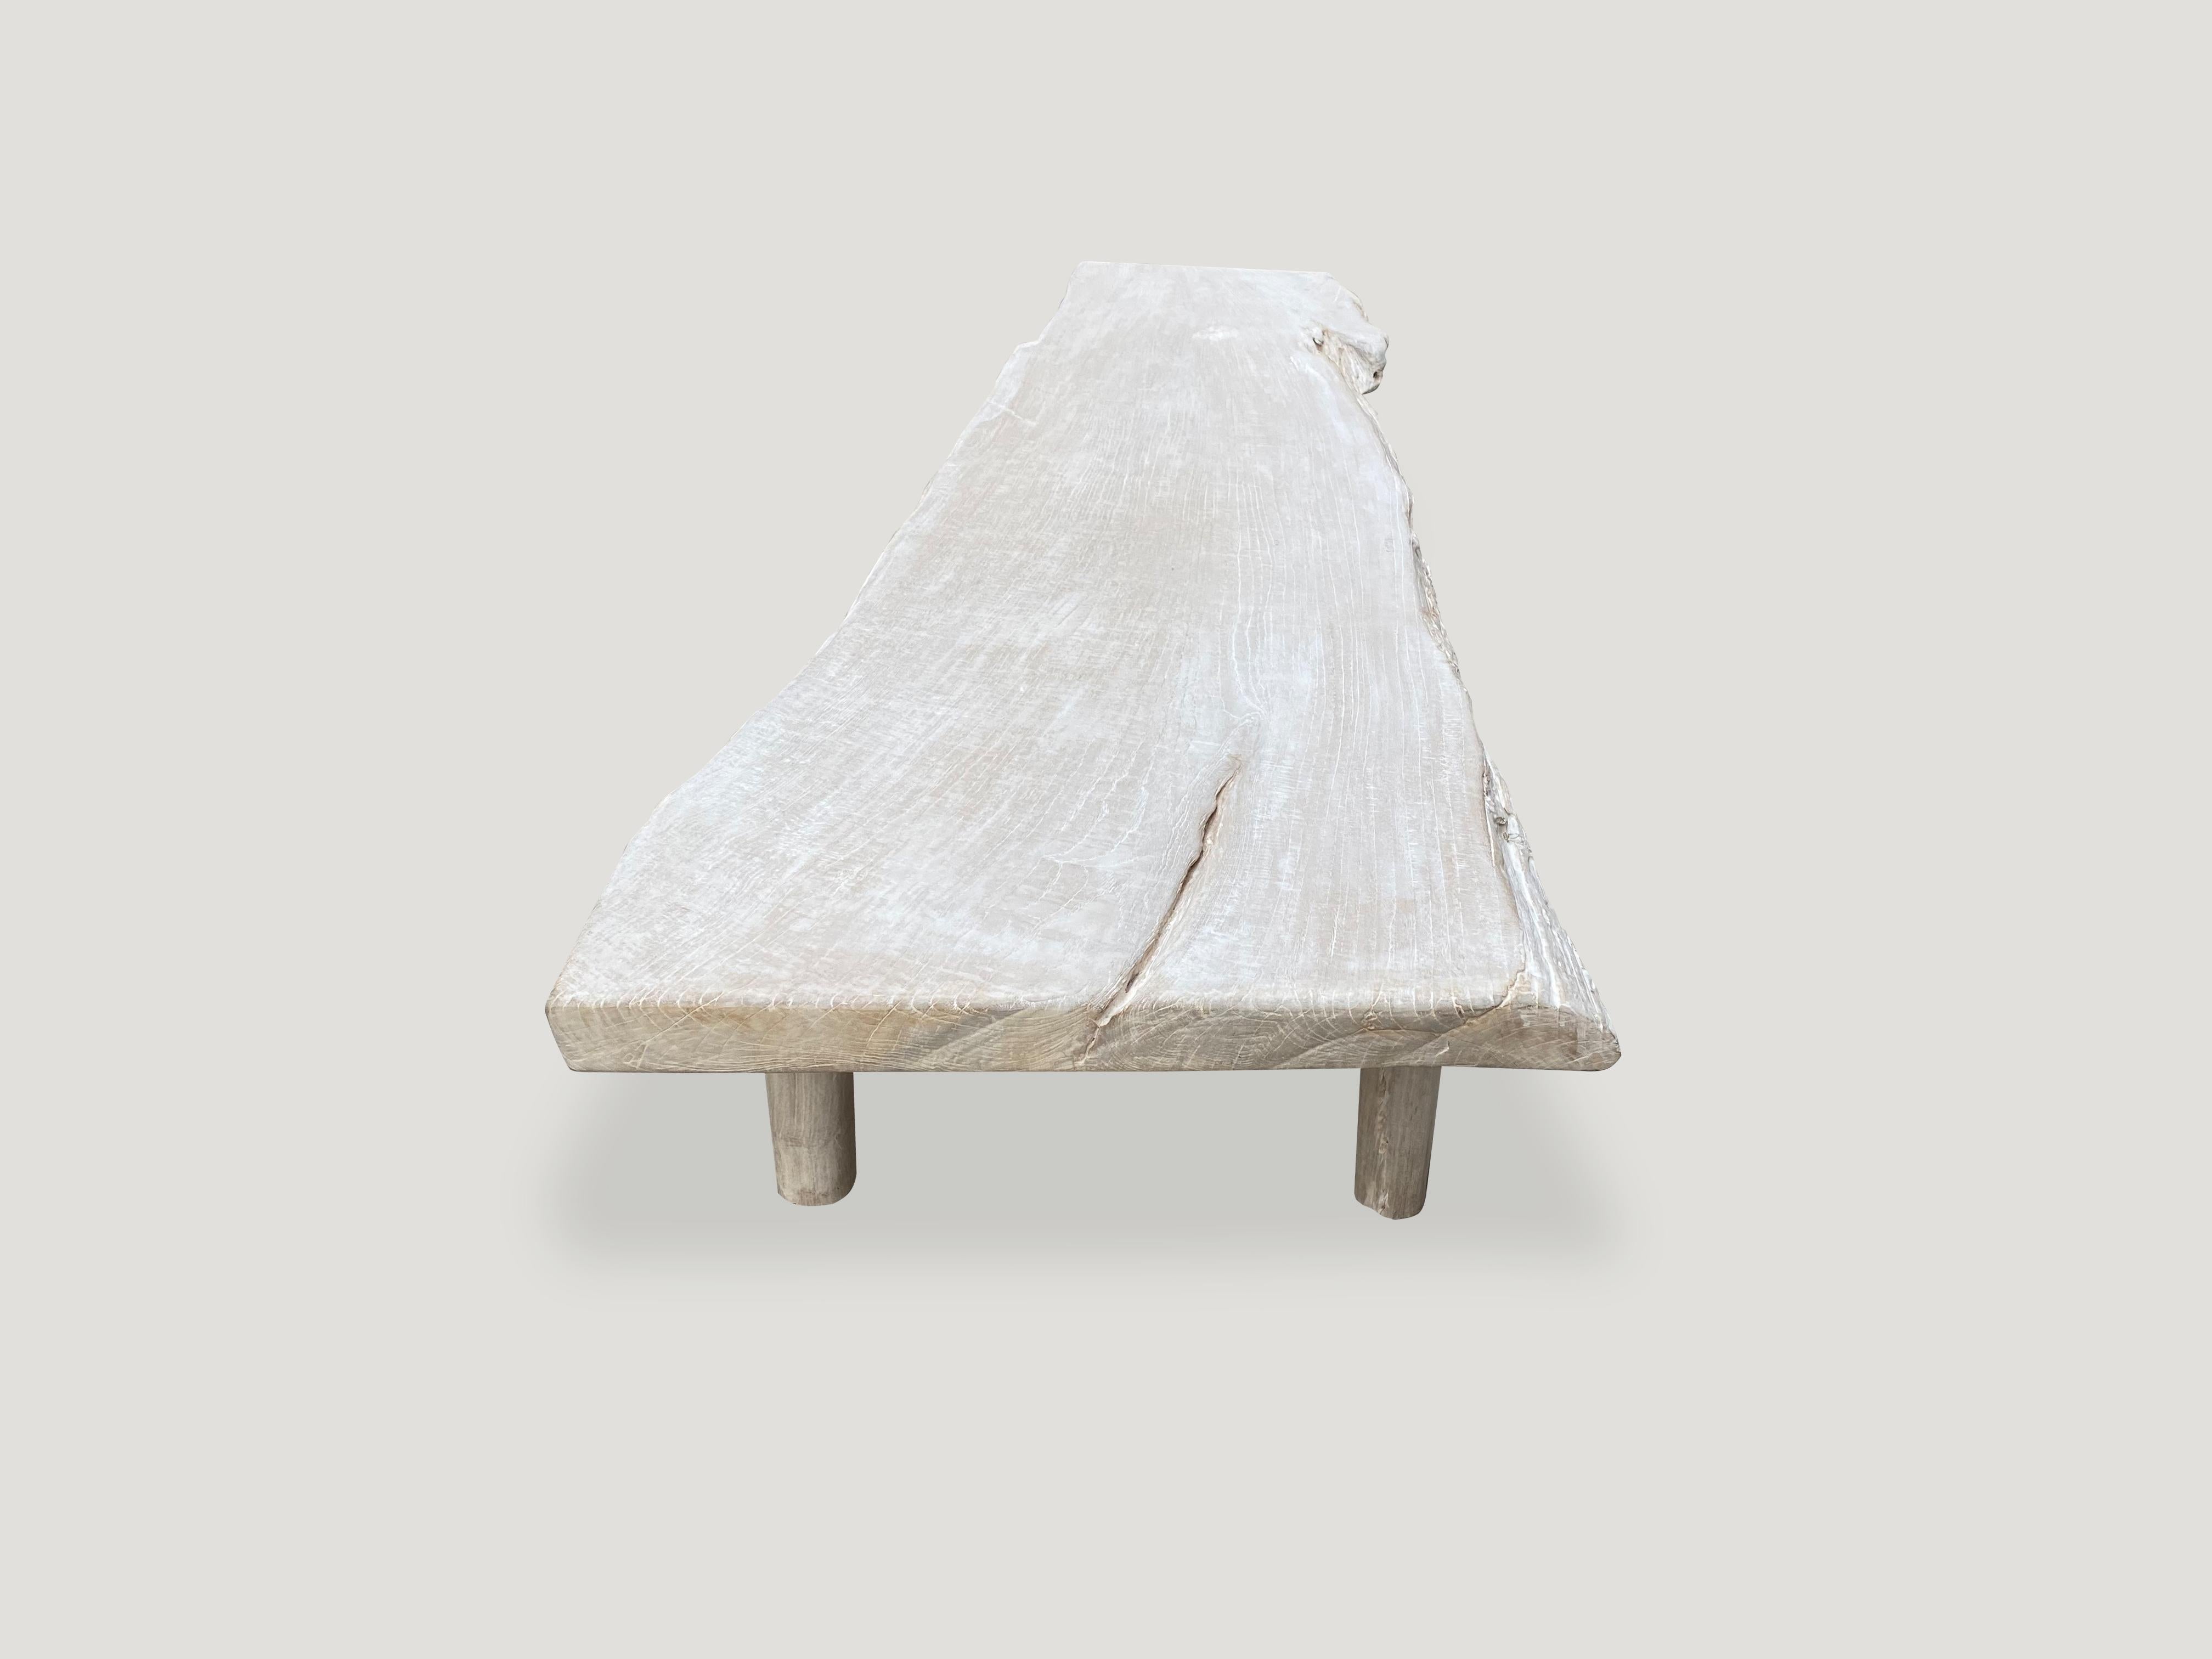 Contemporary Andrianna Shamaris Minimalist Live Edge Teak Wood Coffee Table or Bench For Sale